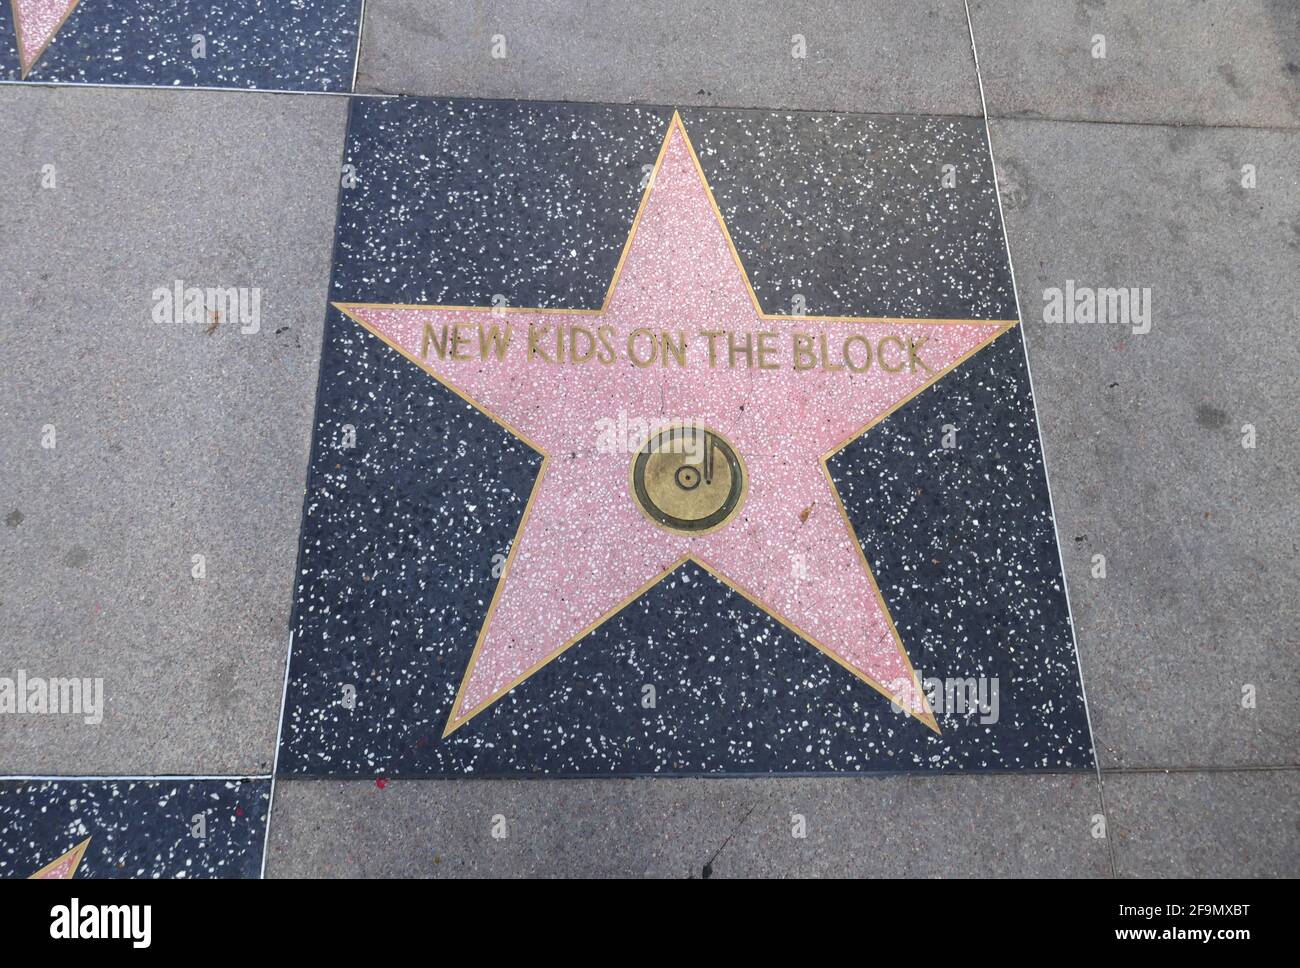 Hollywood, California, USA 17th April 2021 A general view of atmosphere of New Kids on the Block Star on the Hollywood Walk of Fame on April 17, 2021 in Hollywood, California, USA. Photo by Barry King/Alamy Stock Photo Stock Photo